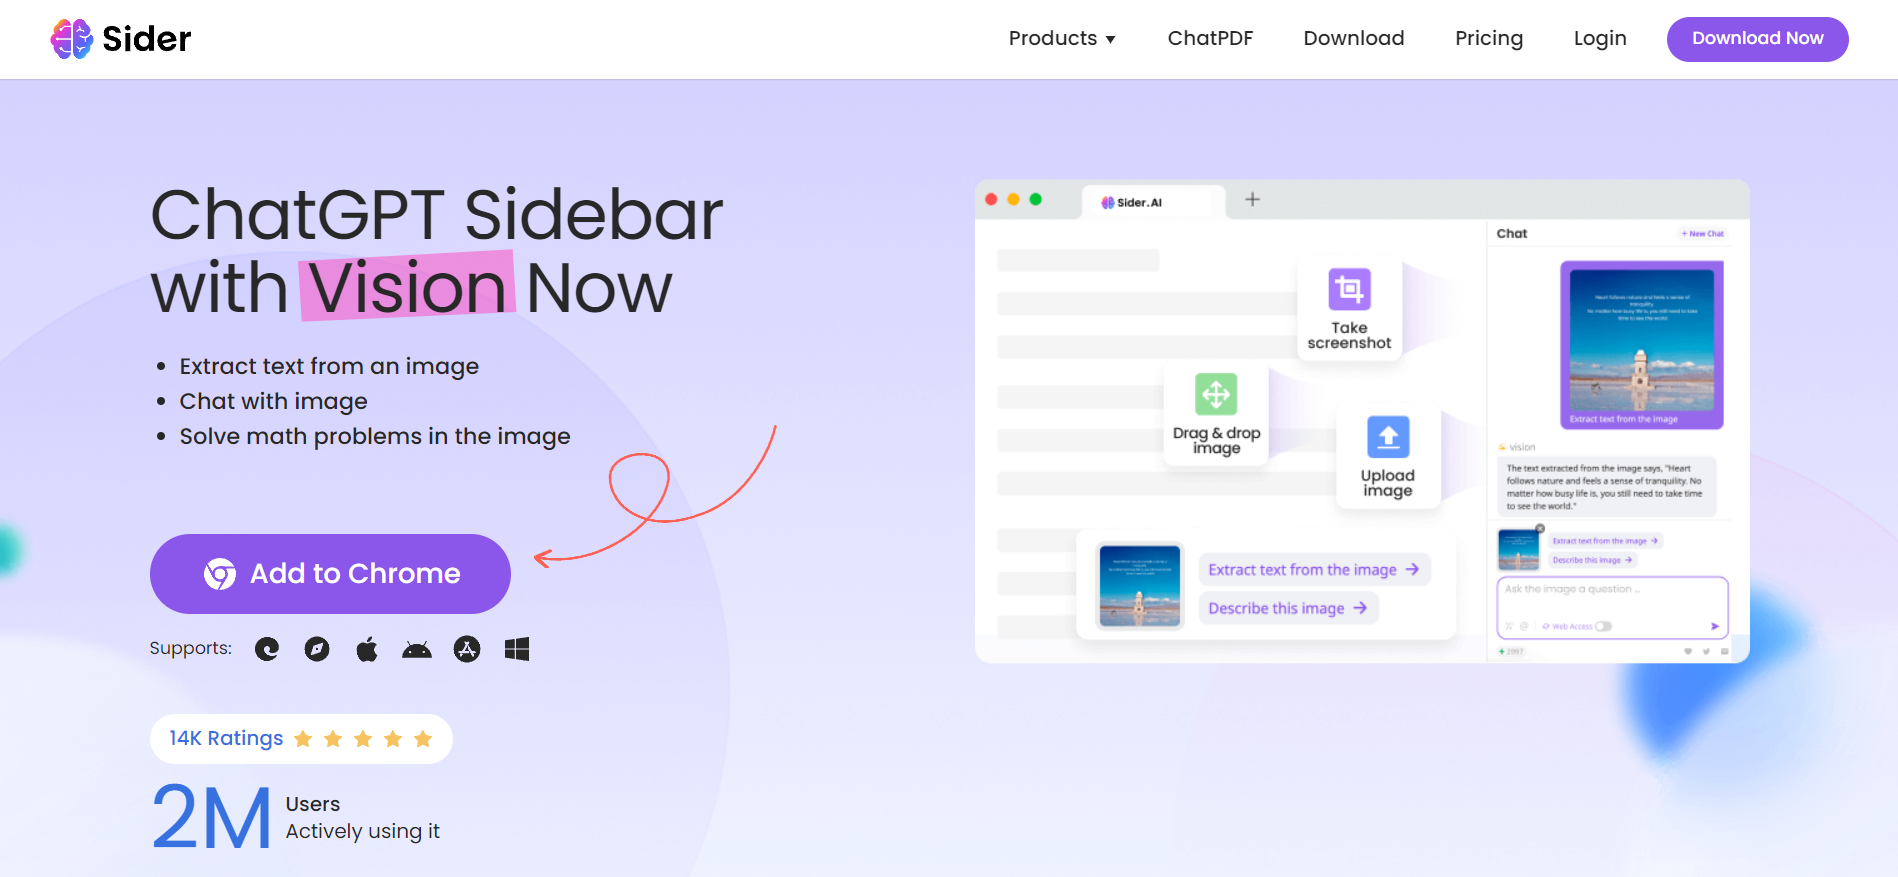 Sider browser extension for email